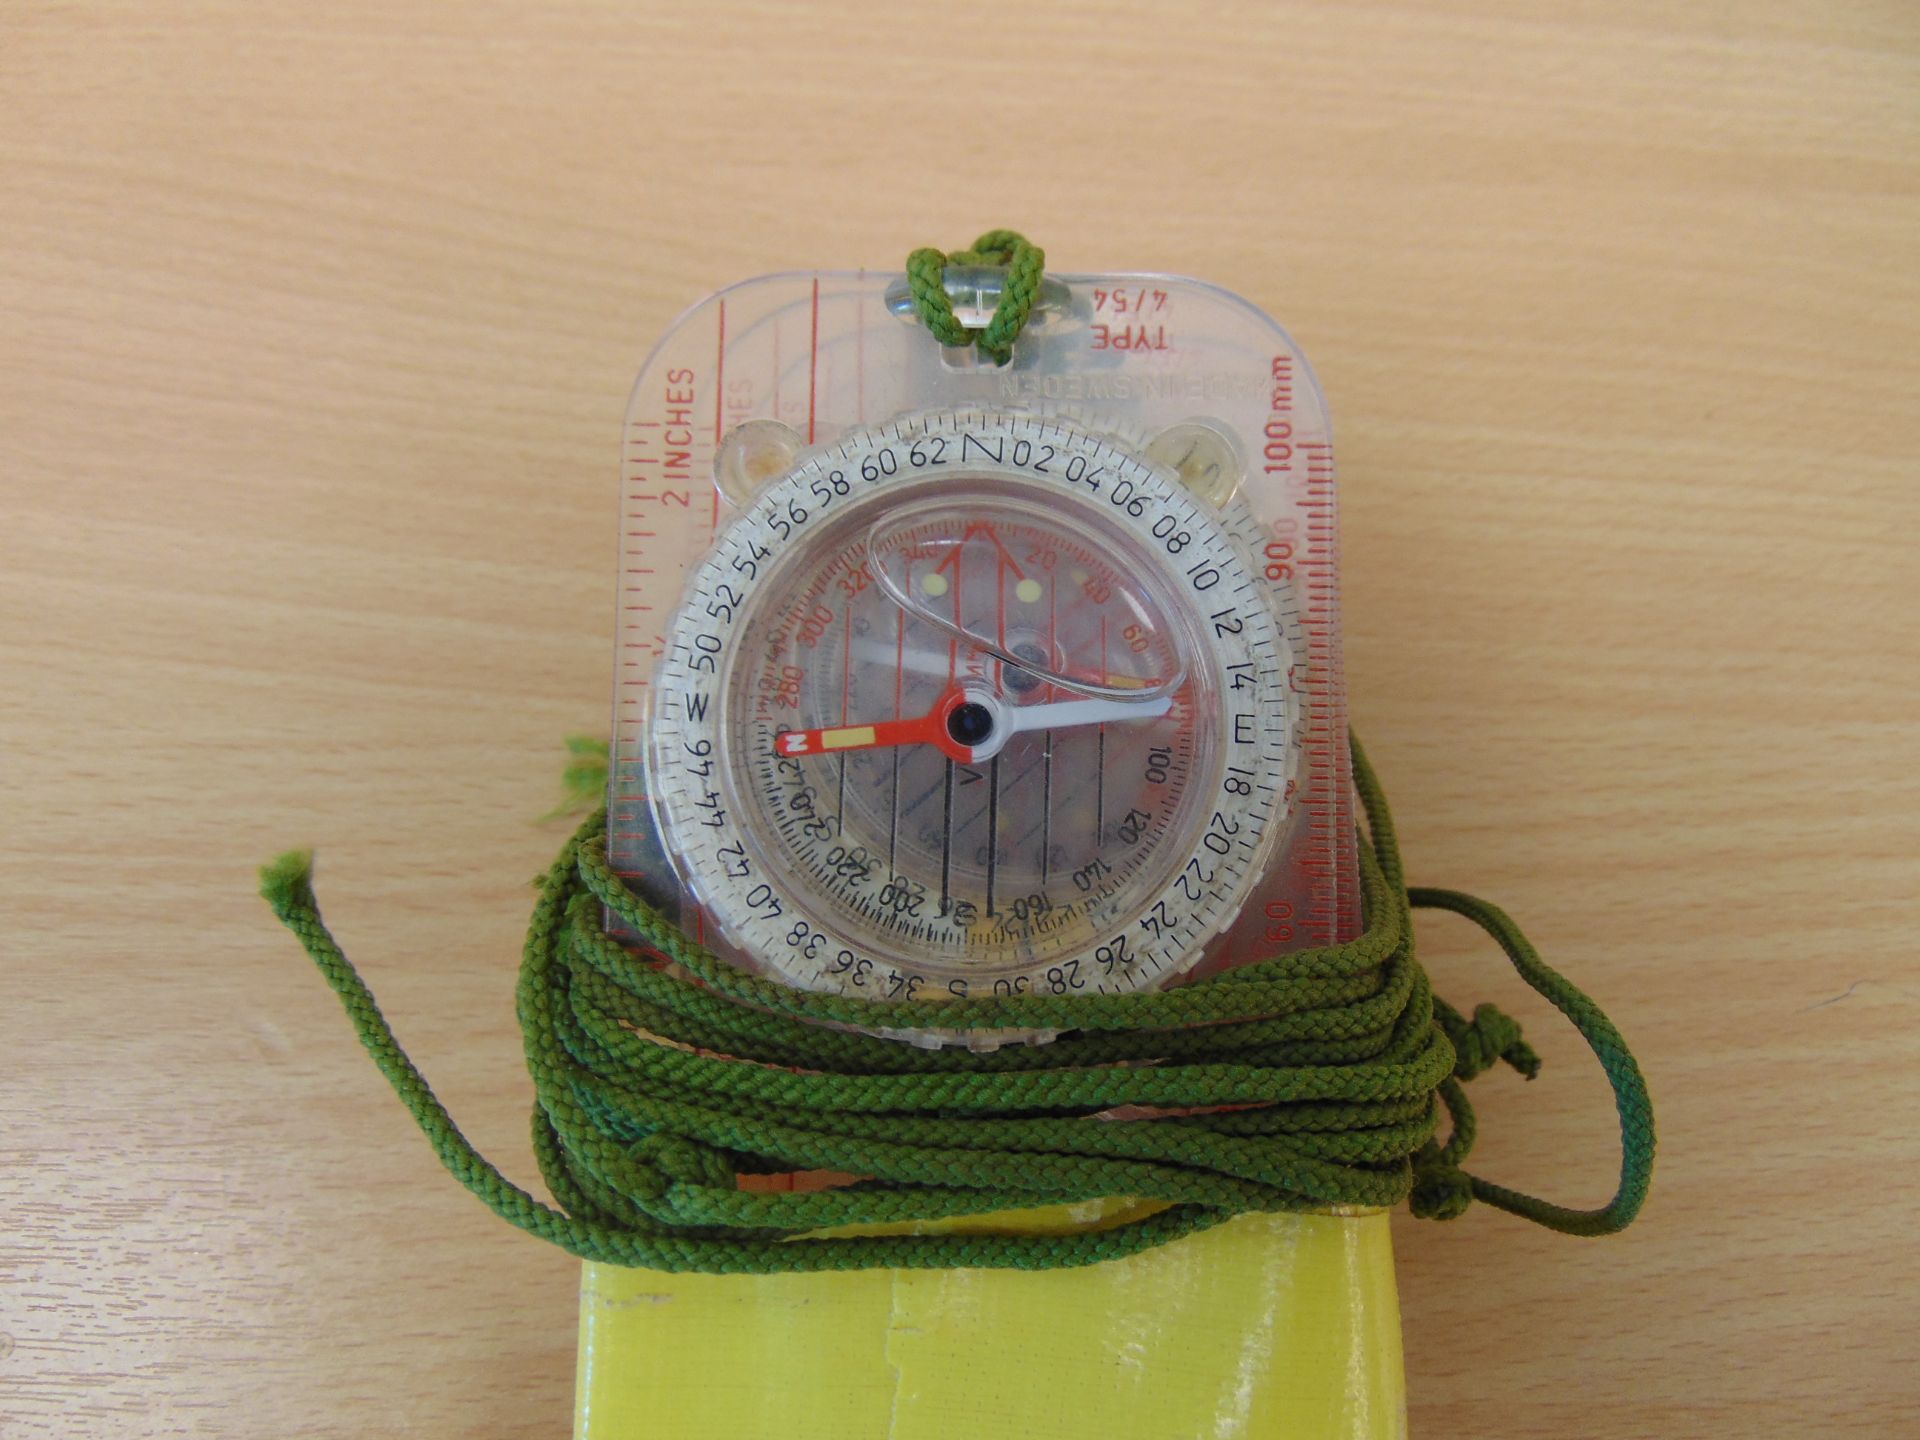 6 x Silva British Army issue Map Reading Compass with Lanyard - Image 3 of 3